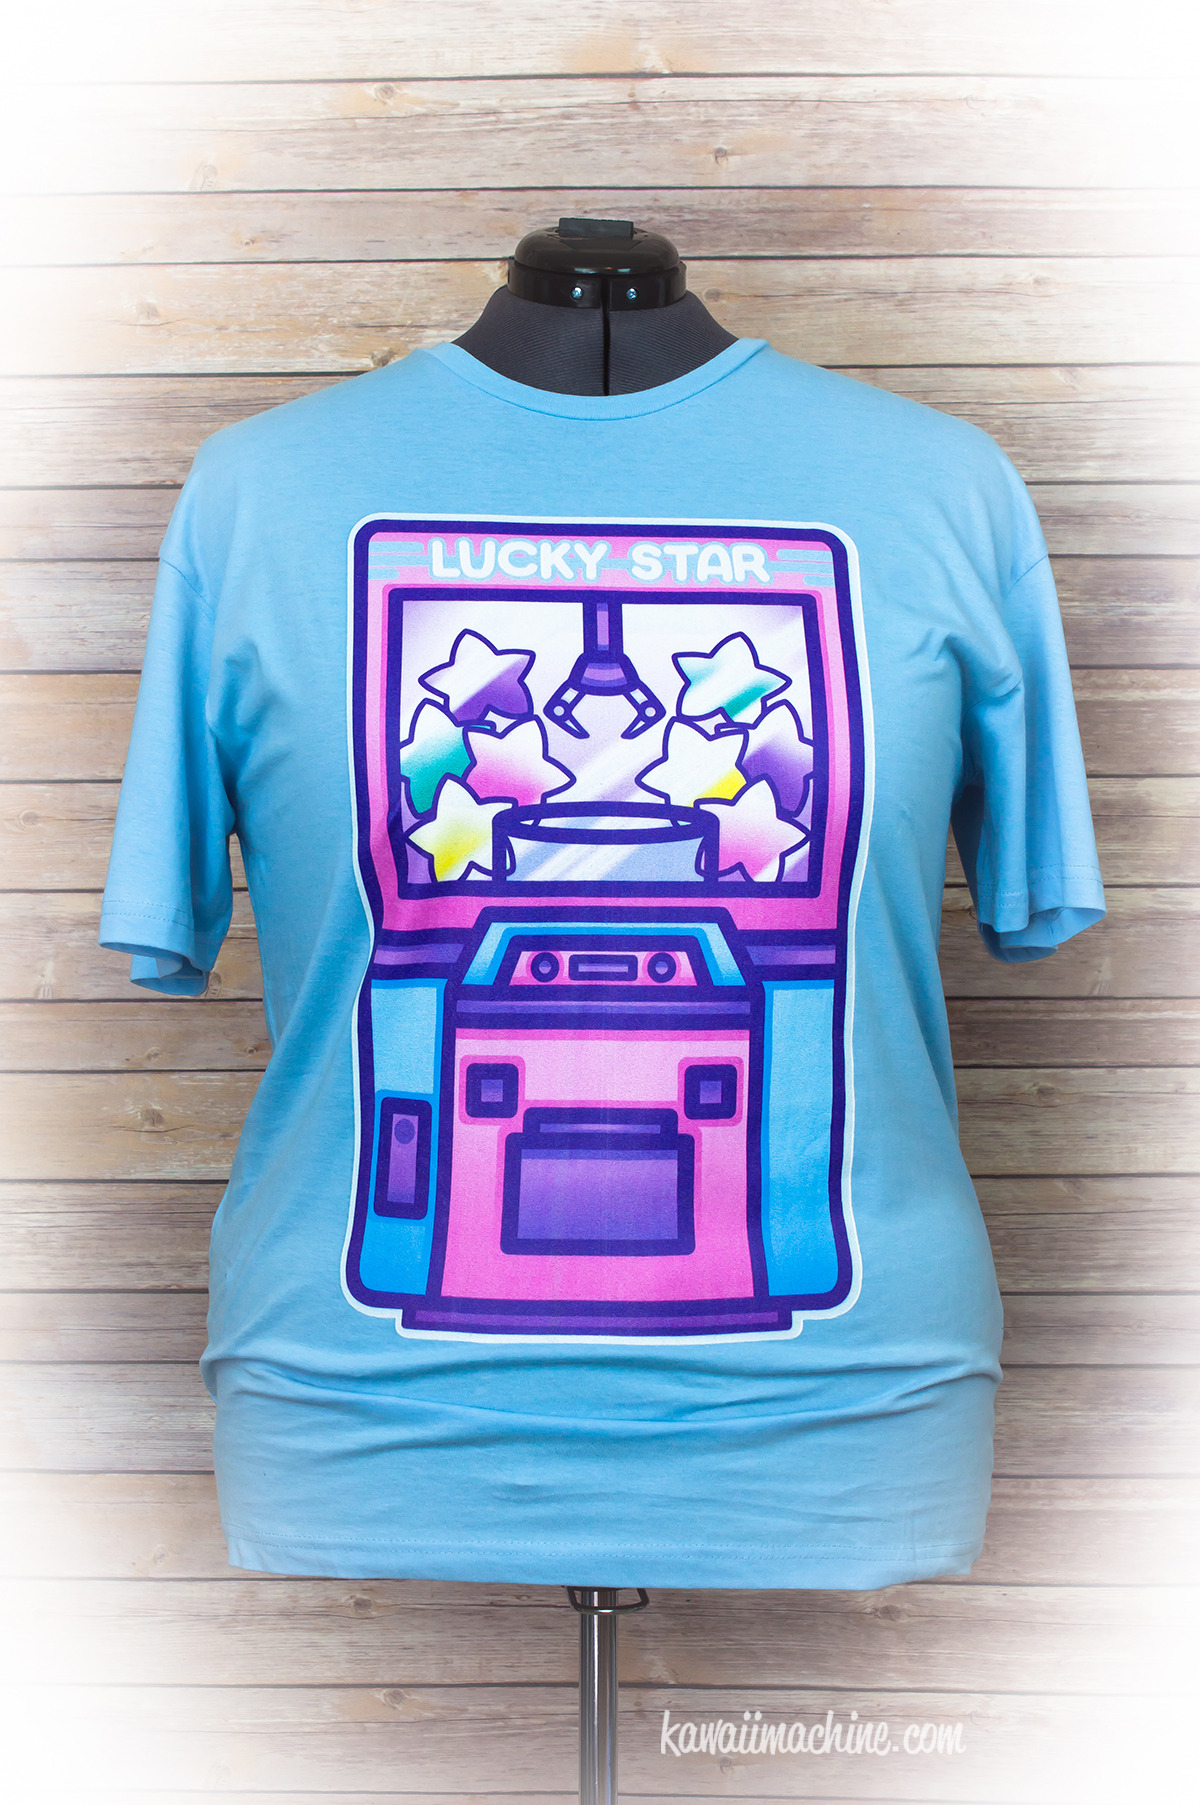 thekawaiimachine:  The Lucky Star UFO Catcher tee is now available in the shop! 